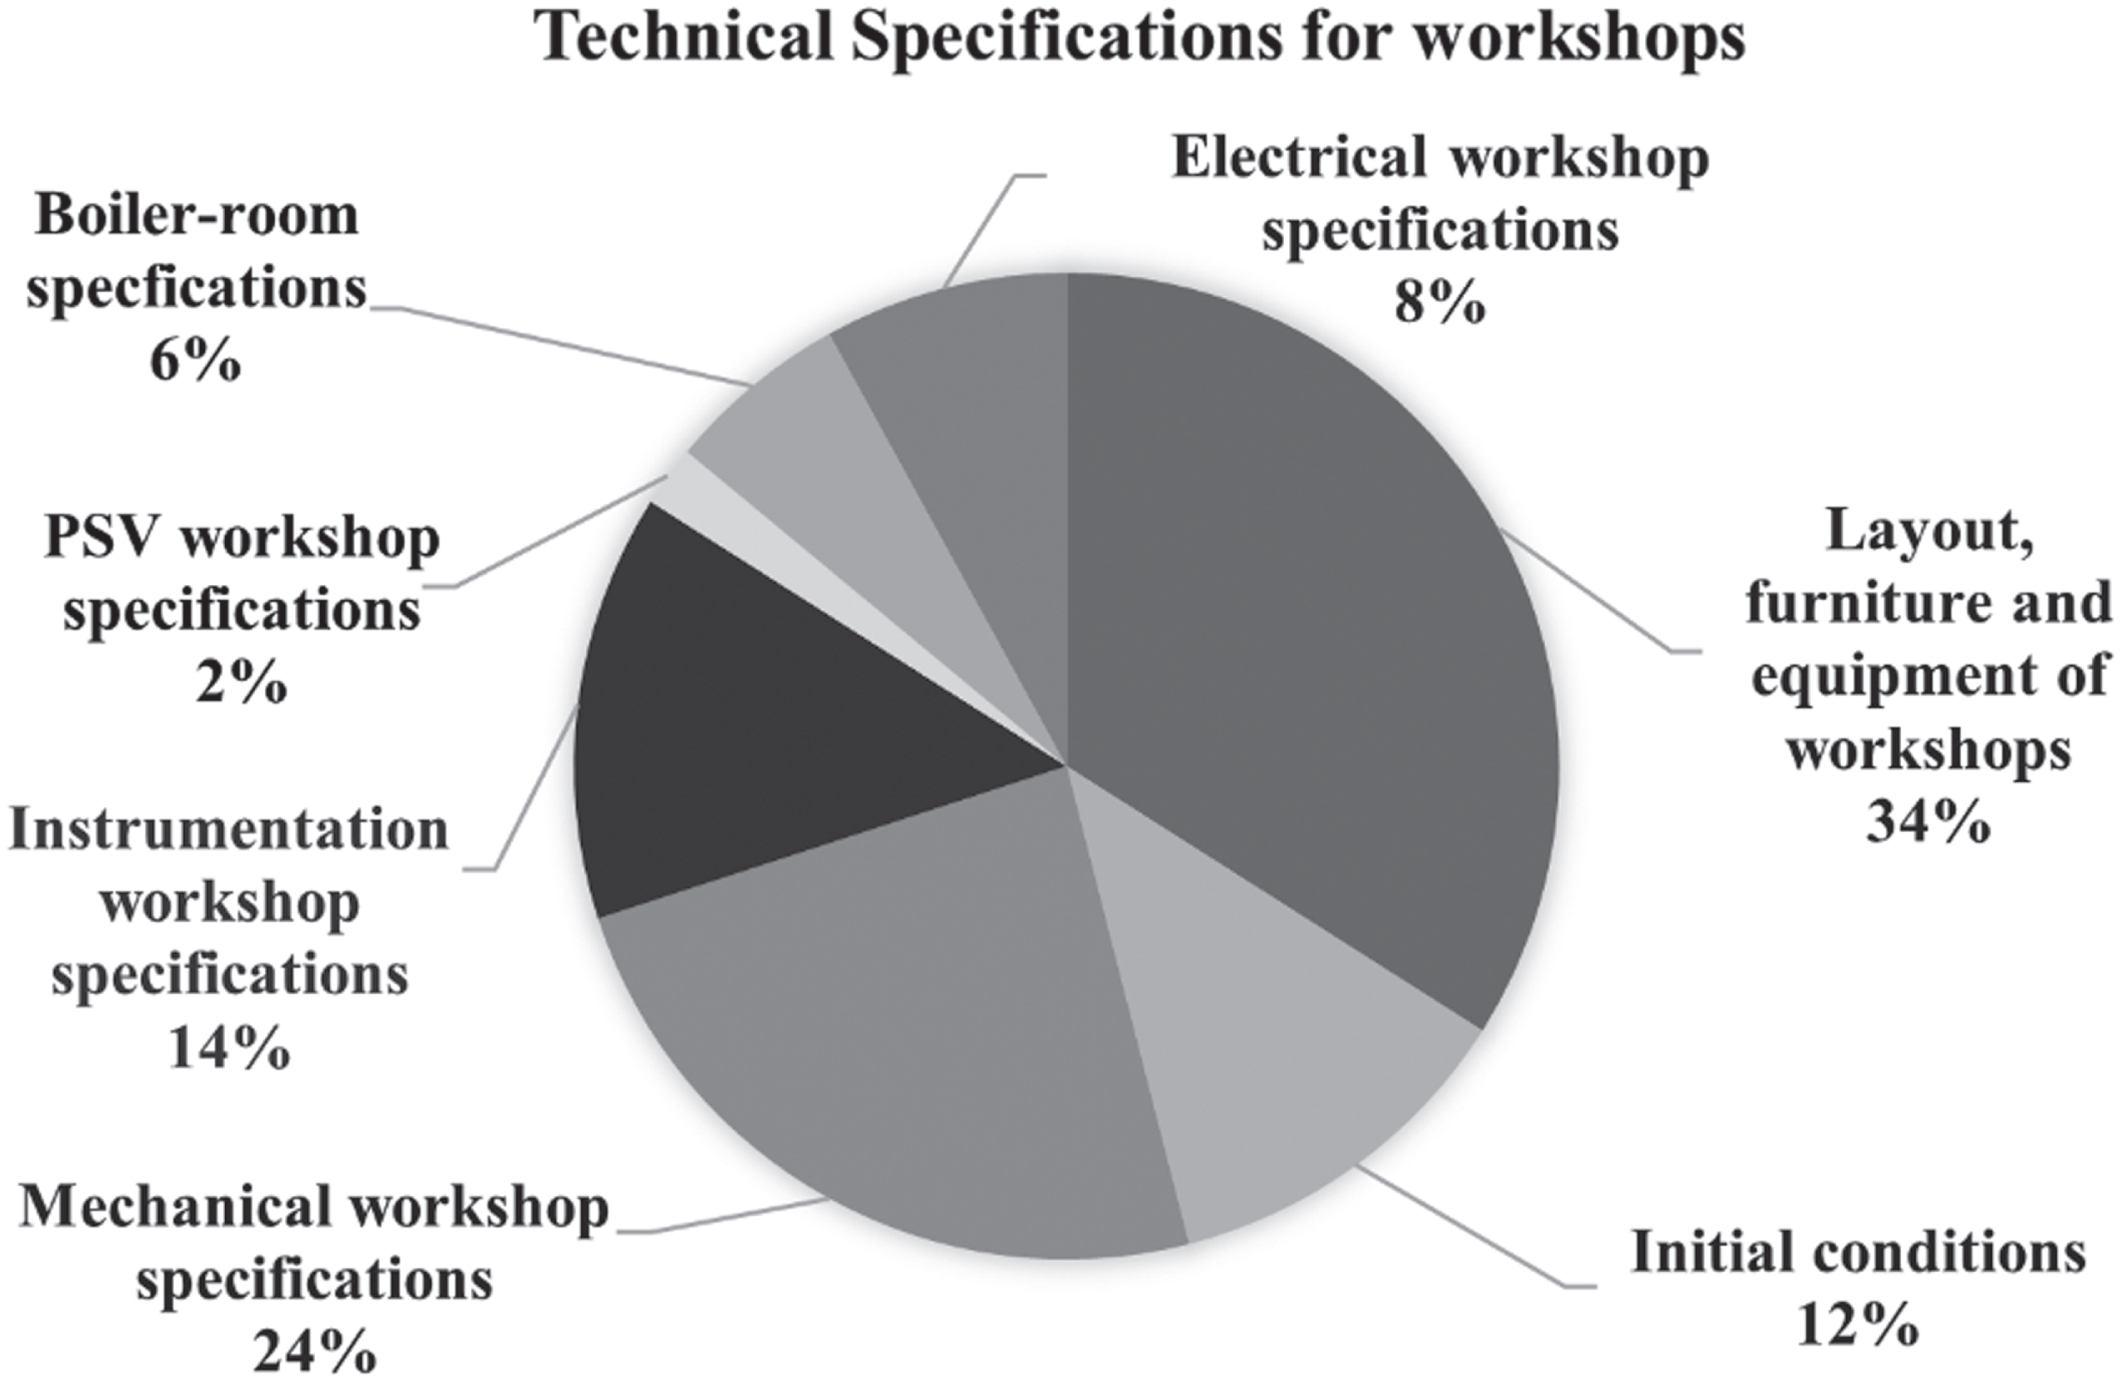 Type of technical specifications for workshops.